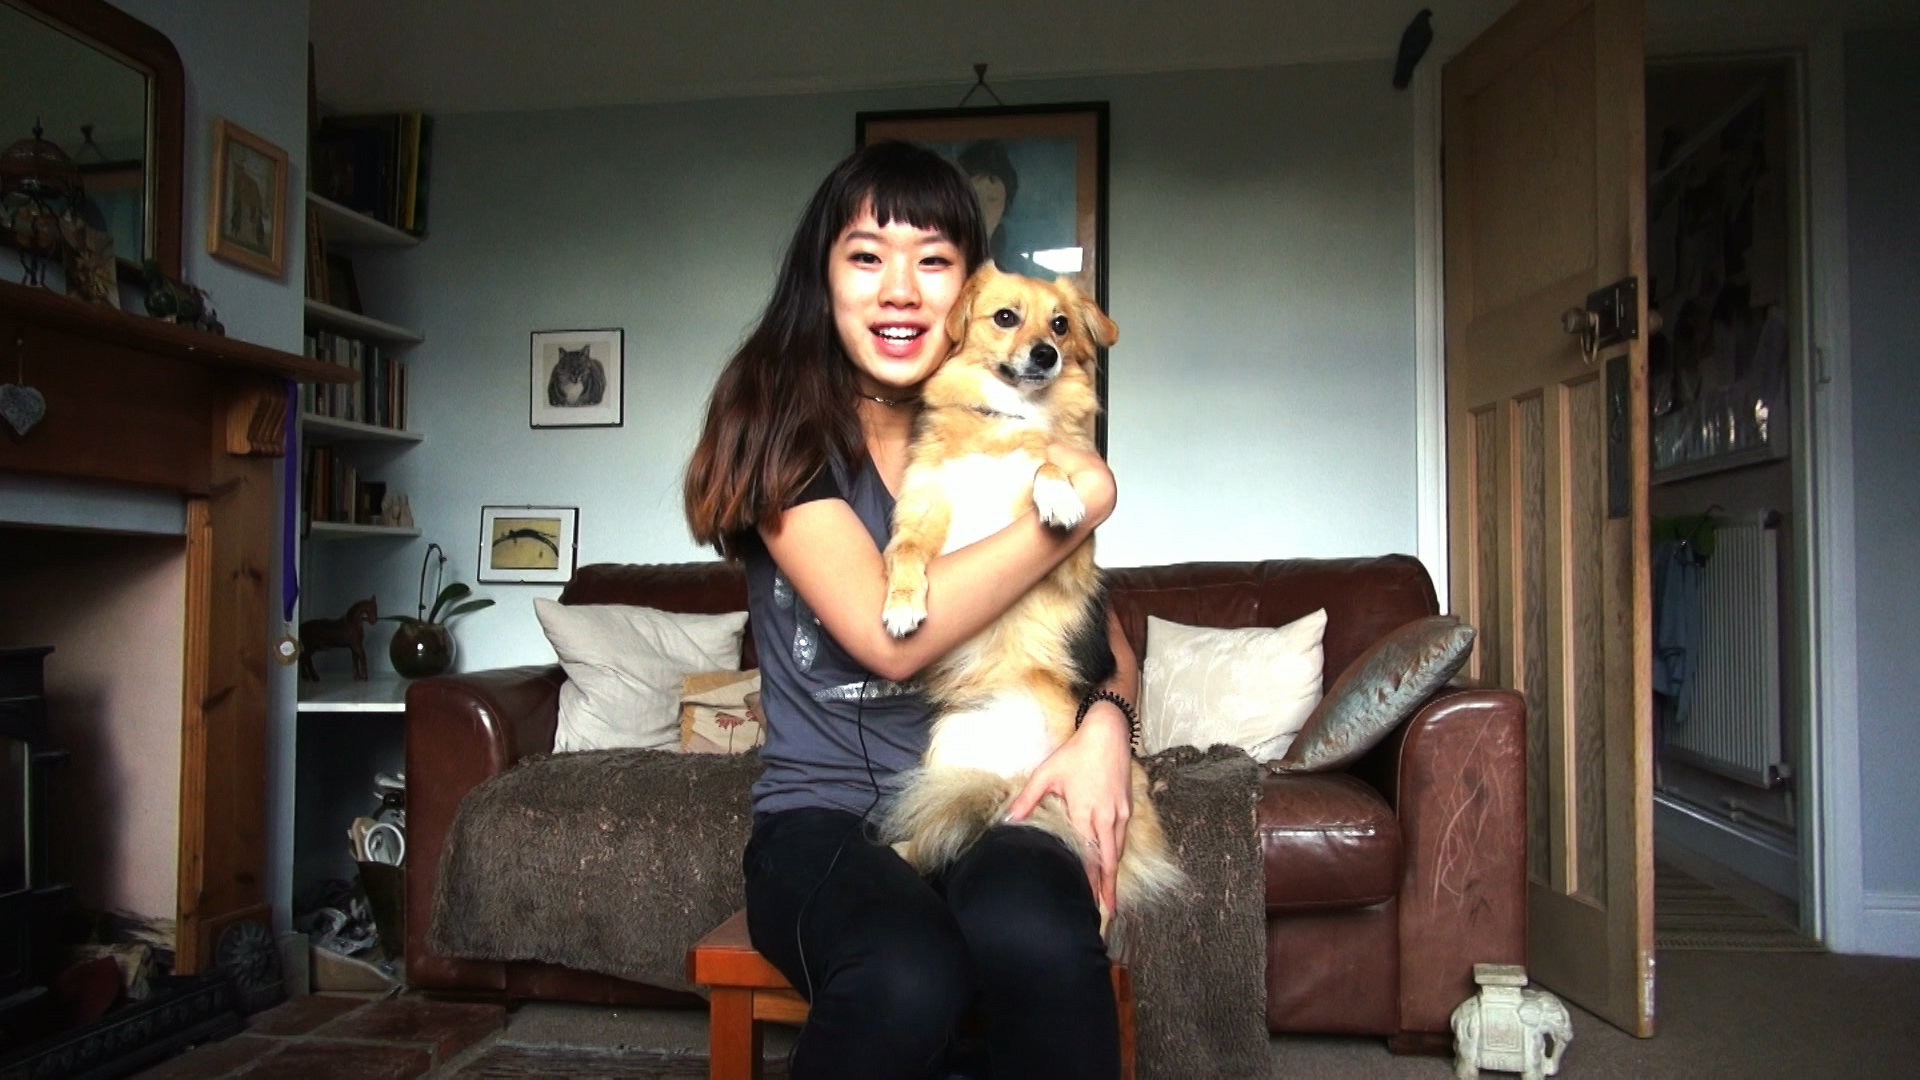 My Life: Adopted from China - girl holding pet dog